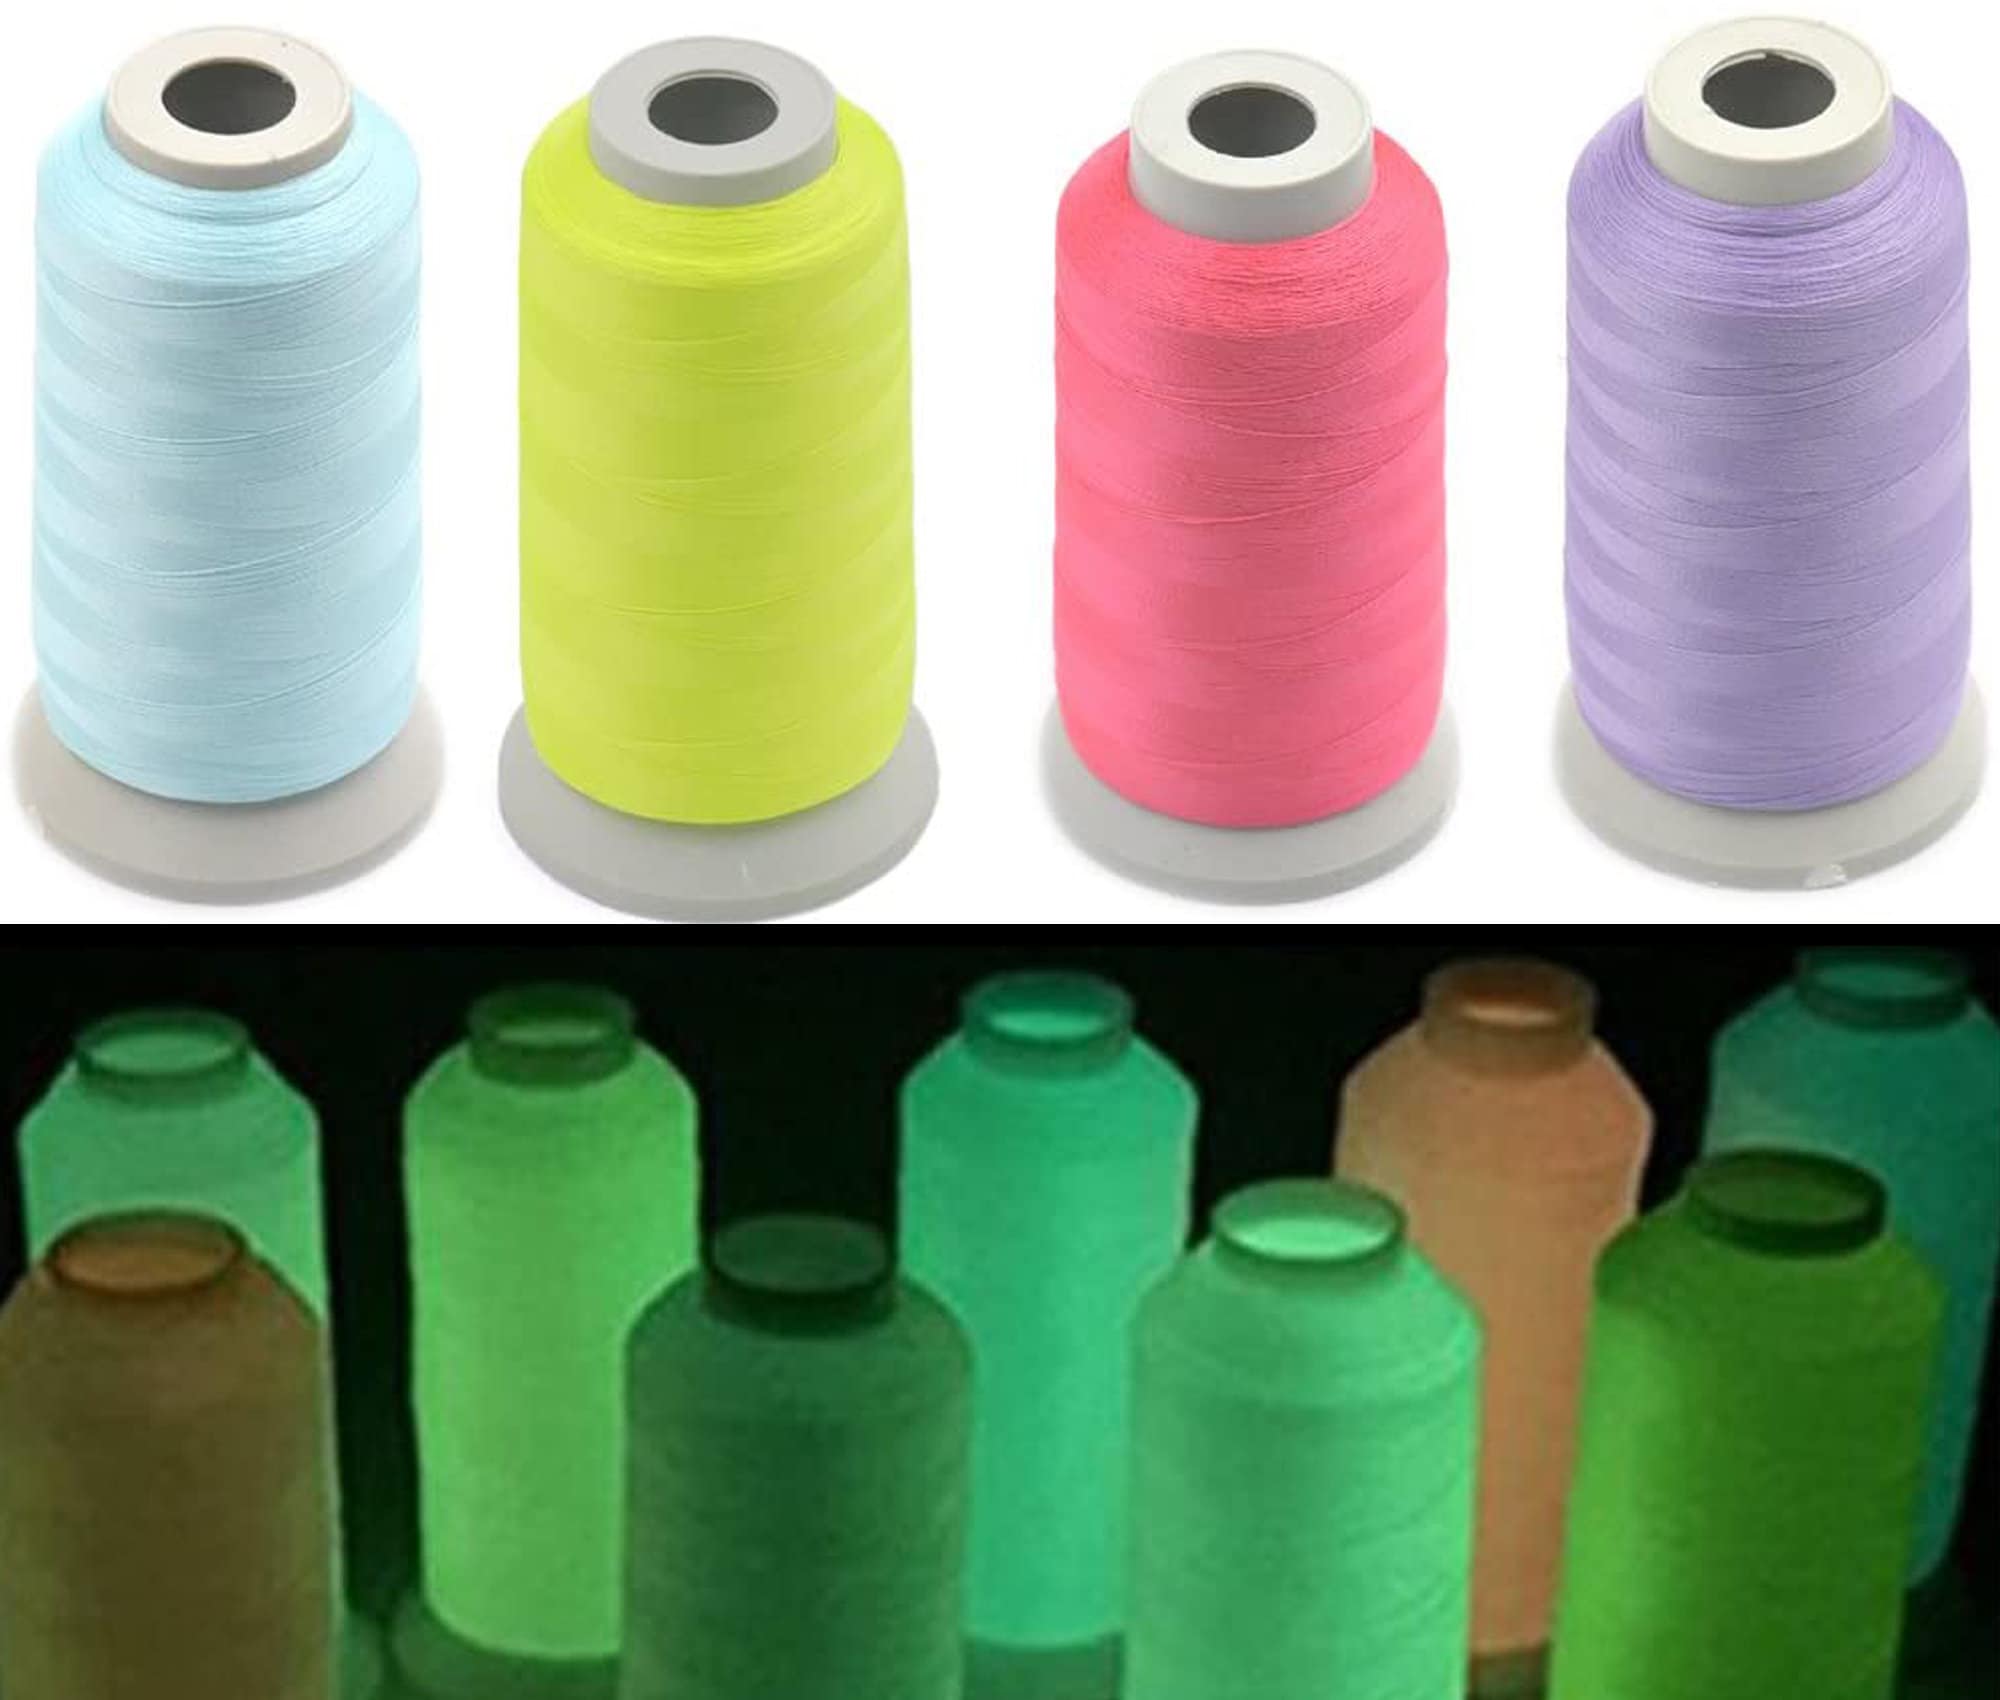 New arrival Simthread glow in the dark embroidery thread 150Y x 5 assorted  colors for beginners - AliExpress